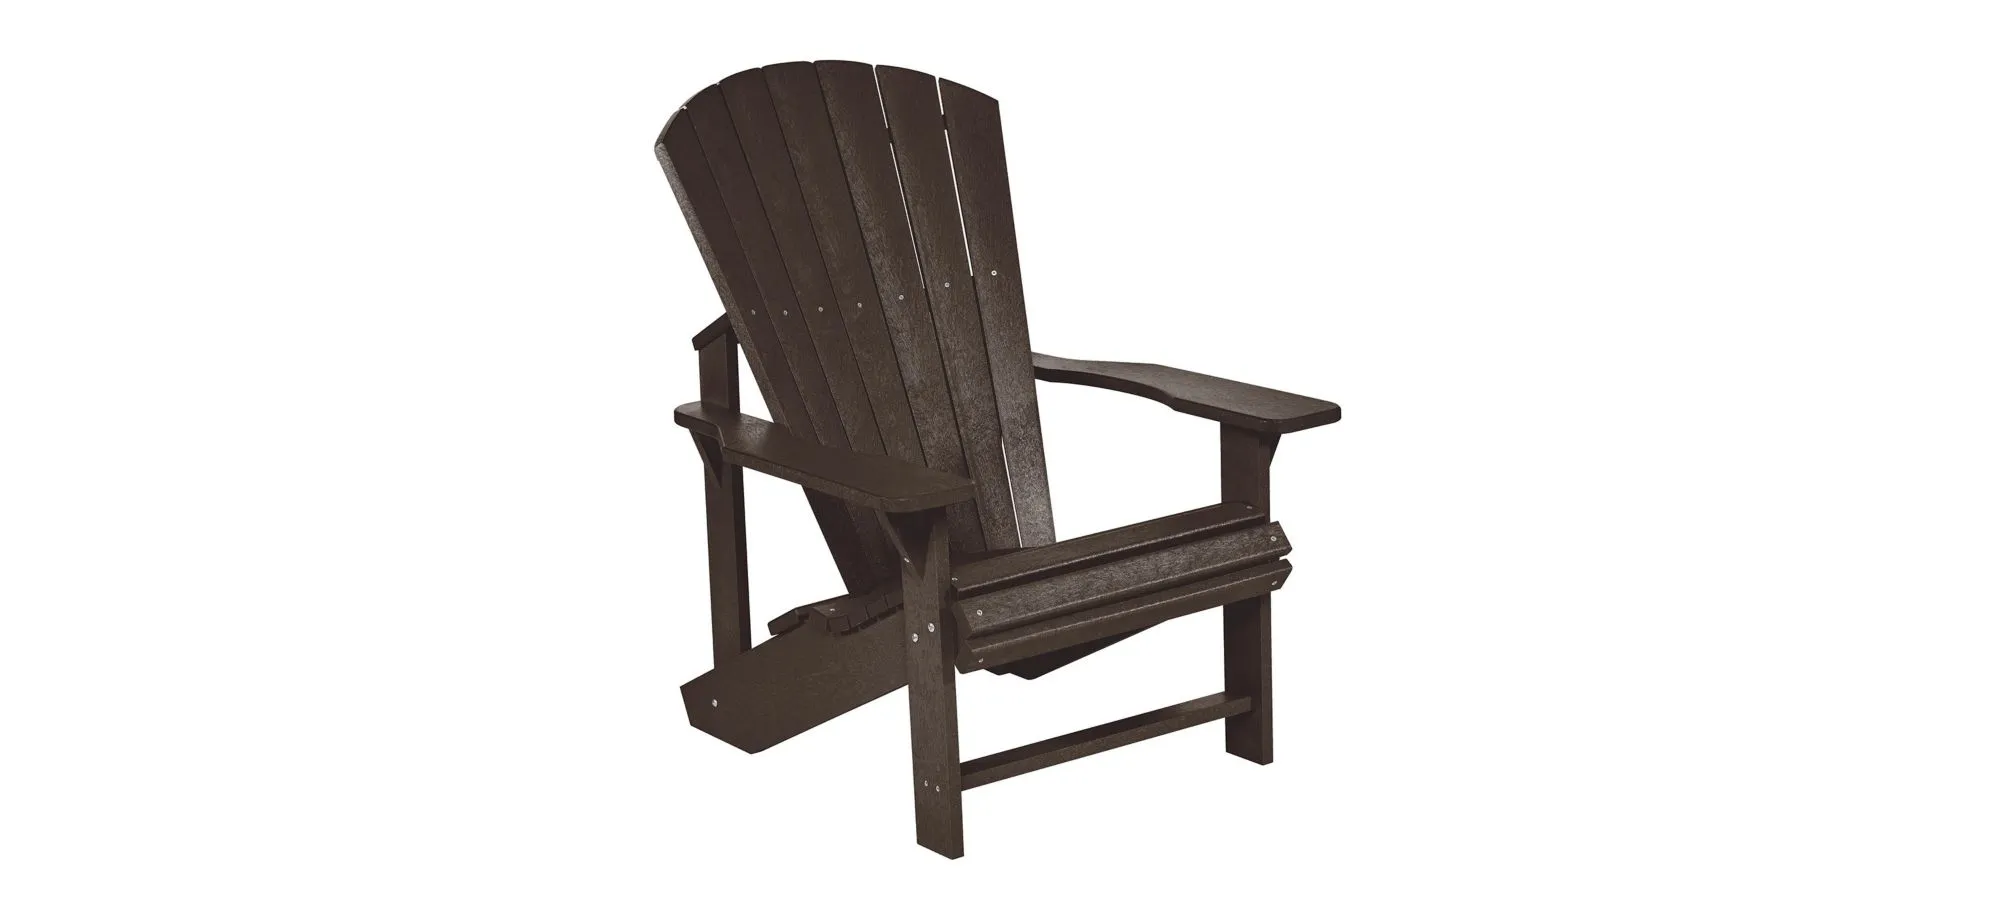 Generation Recycled Outdoor Classic Adirondack Chair in Gray by C.R. Plastic Products